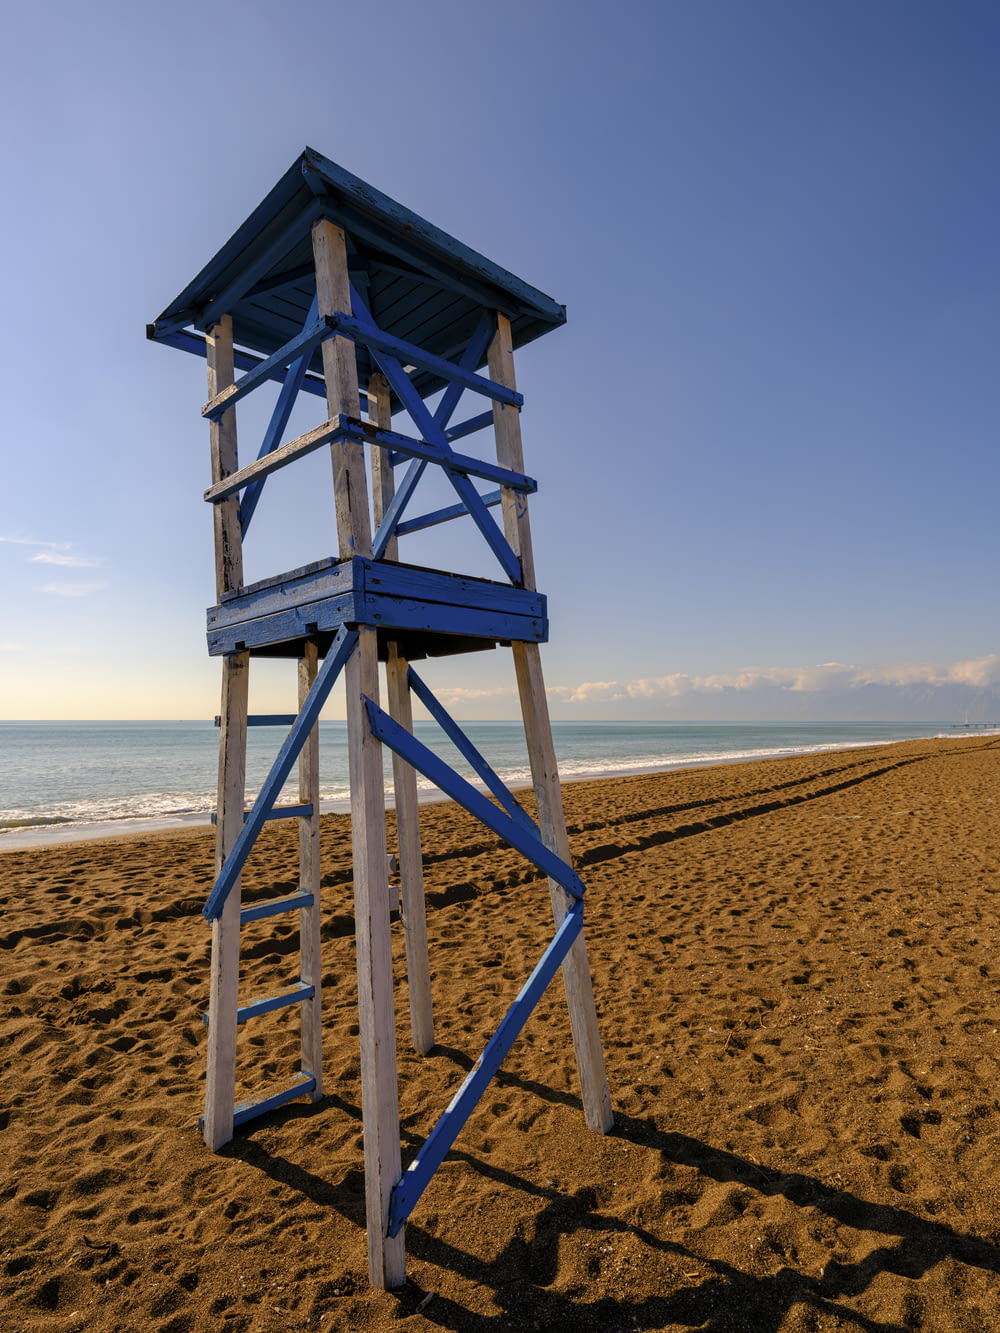 a lifeguard tower on a beach with the ocean in the background